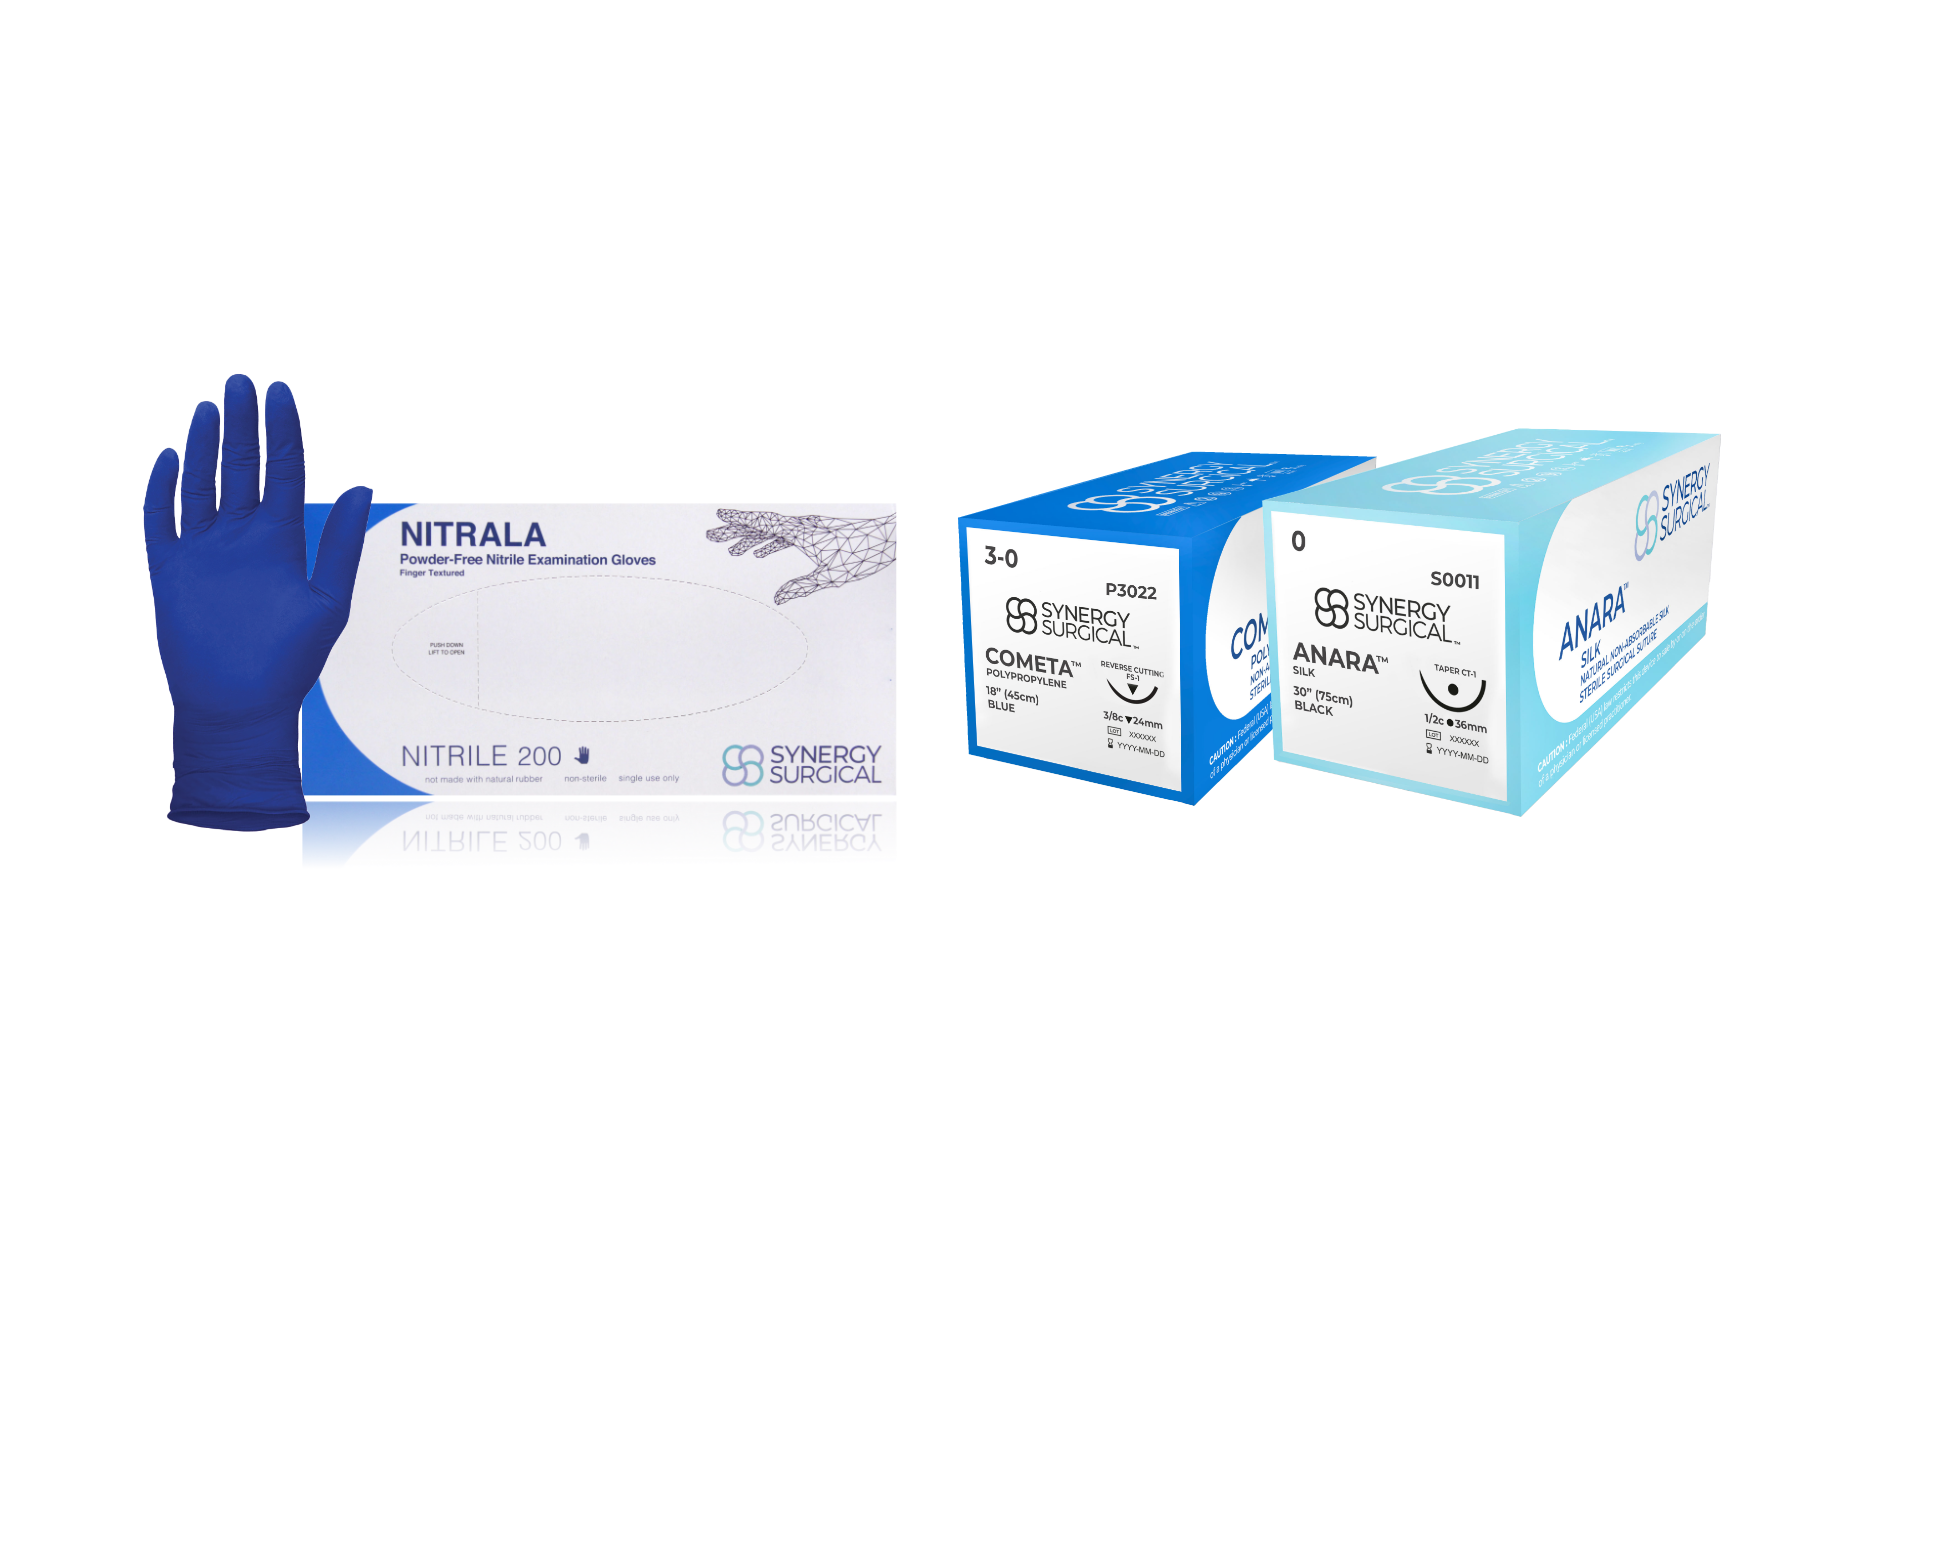 SYNERGY SURGICALSutures & Gloves 20% OFF